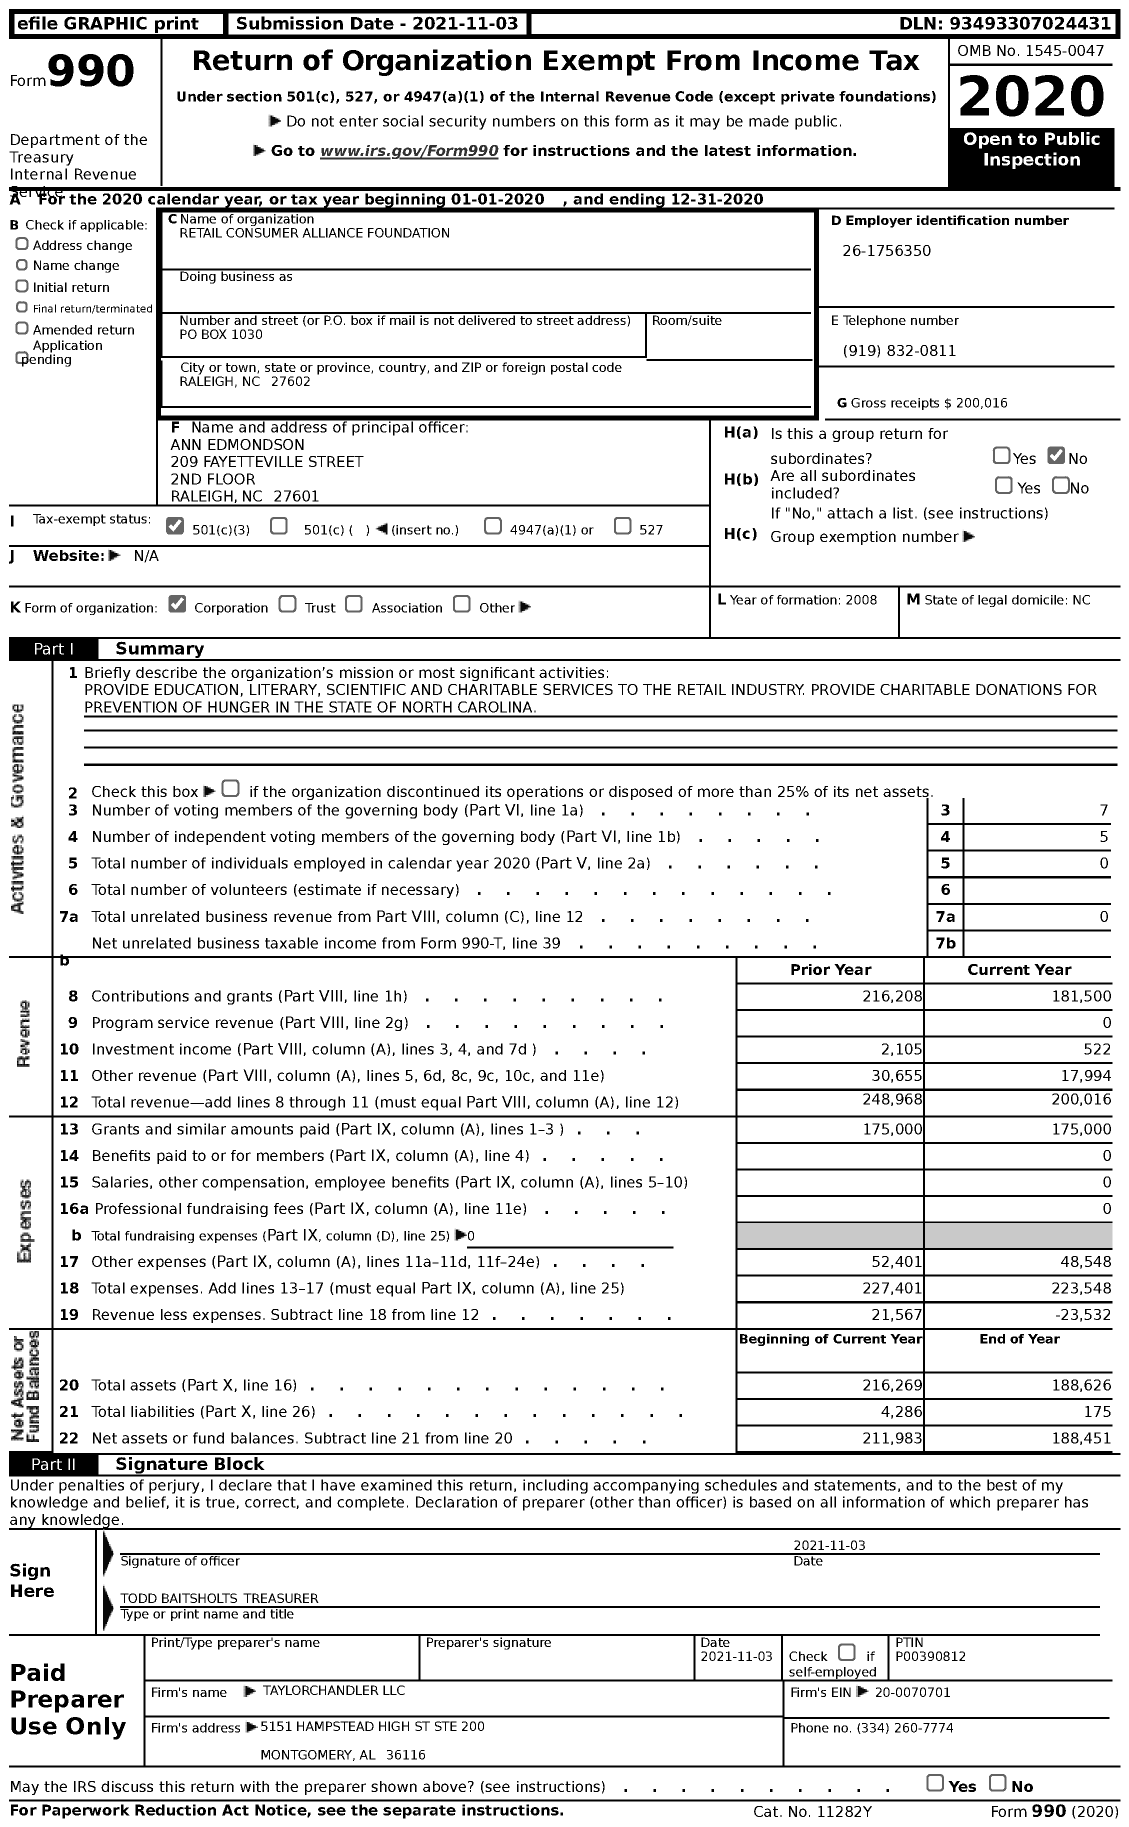 Image of first page of 2020 Form 990 for Retail Consumer Alliance Foundation